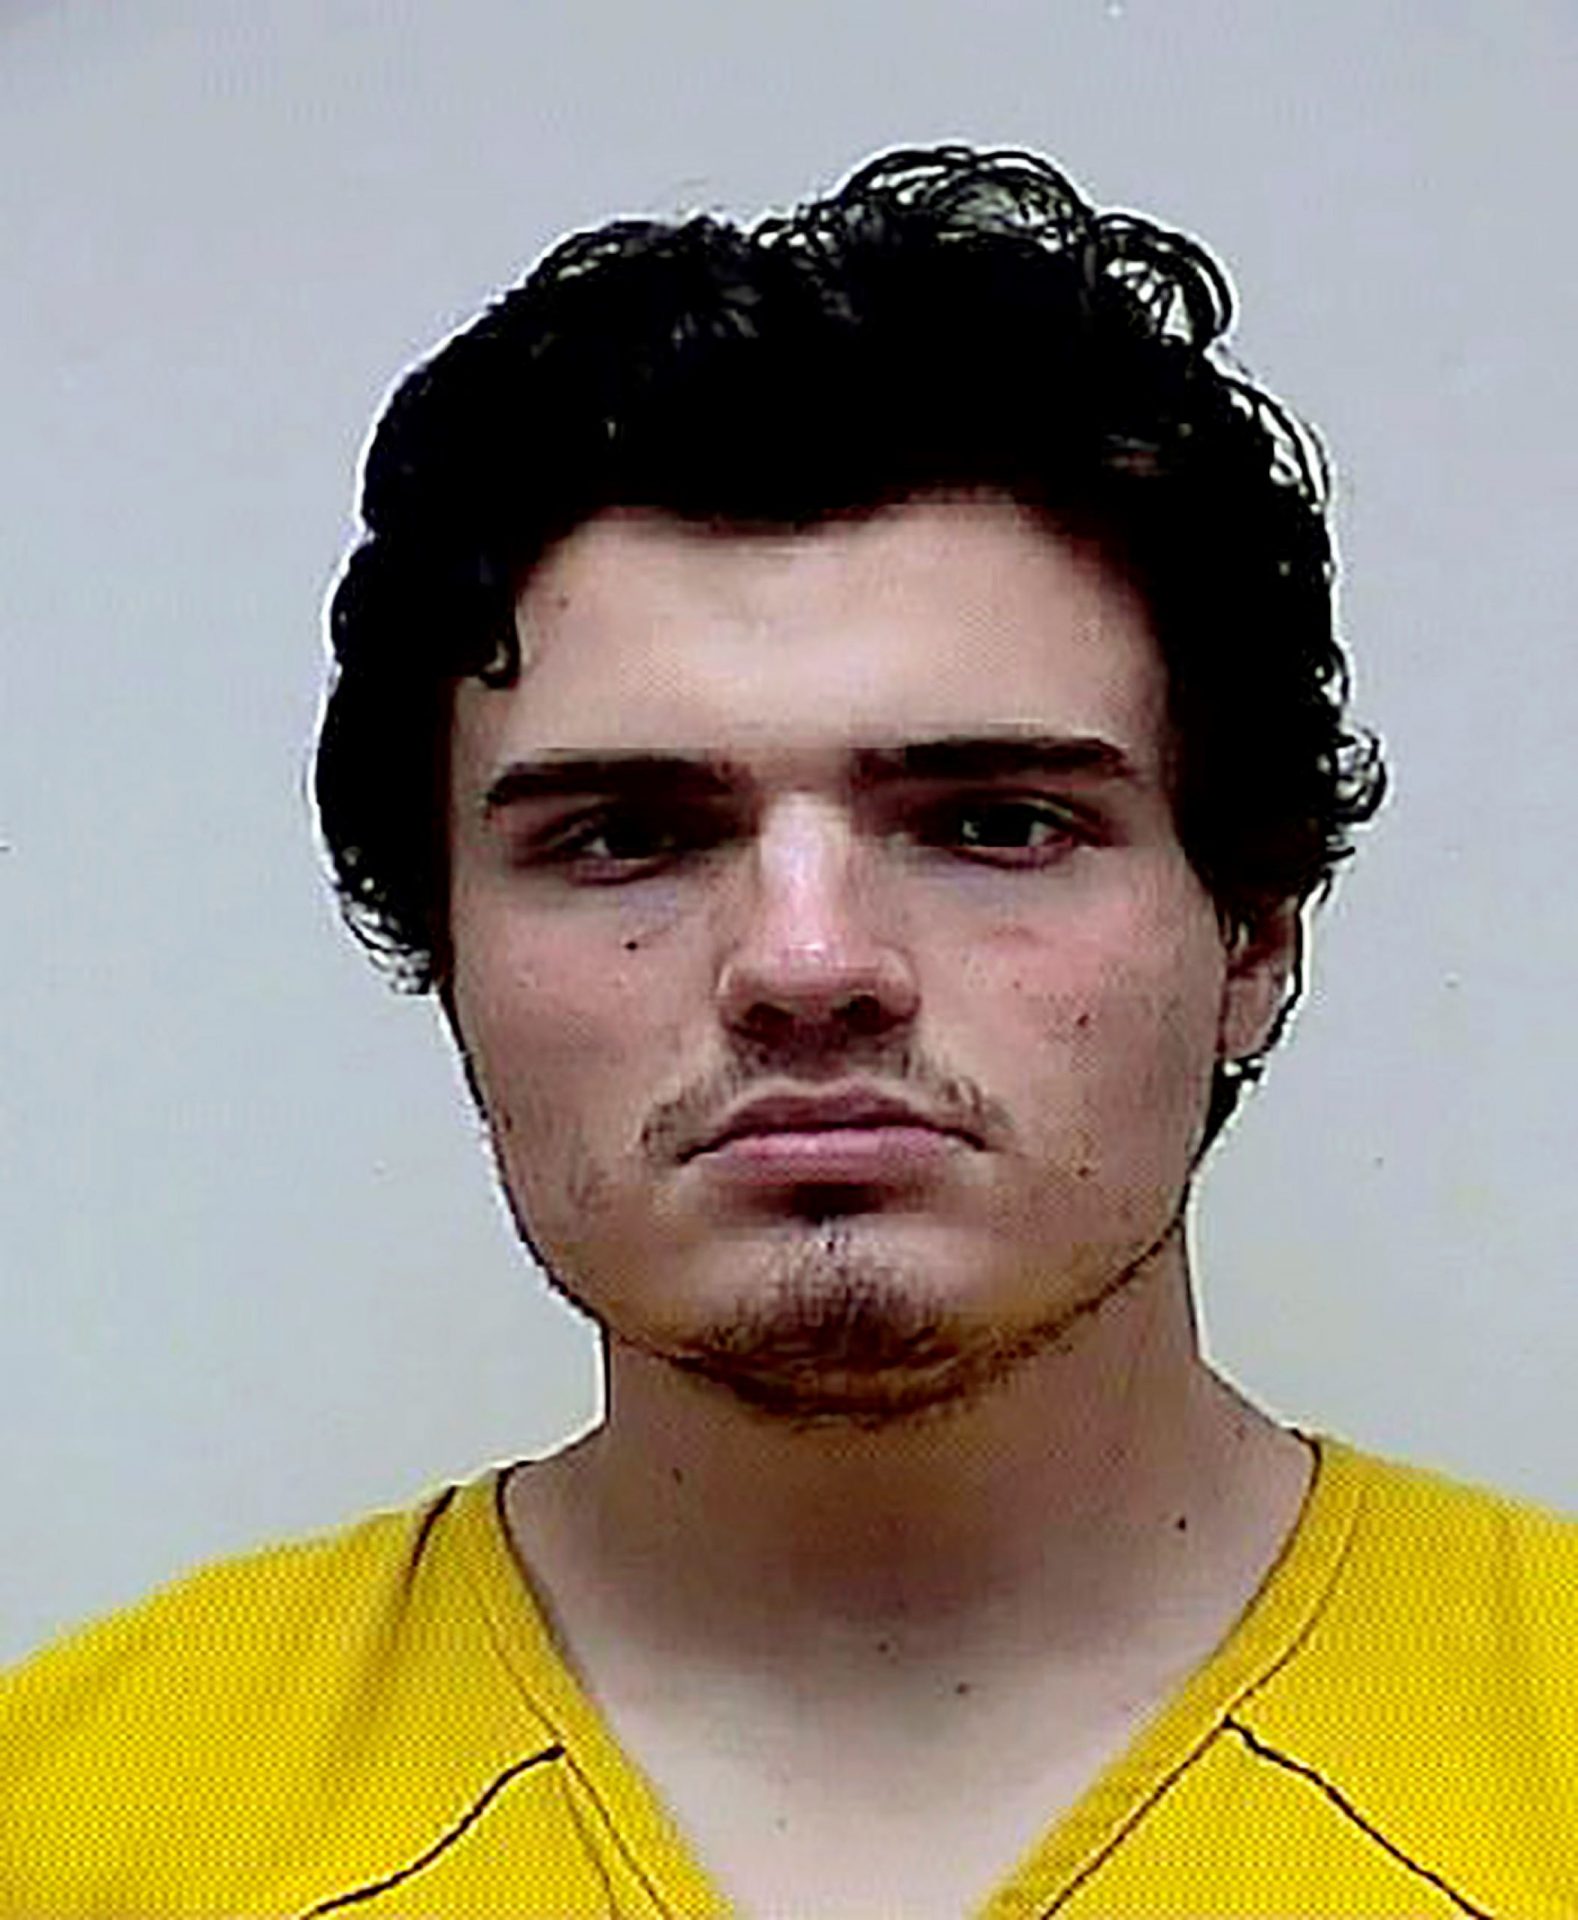 This photo provided by the Washington County, Maryland, Sheriff's Office, Thursday May 28, 2020, shows Peter Manfredonia. The college student wanted in connection with two killings and a kidnapping in Connecticut was taken into custody in Maryland after authorities tracked him to a truck stop, according to new details released by police on Thursday.